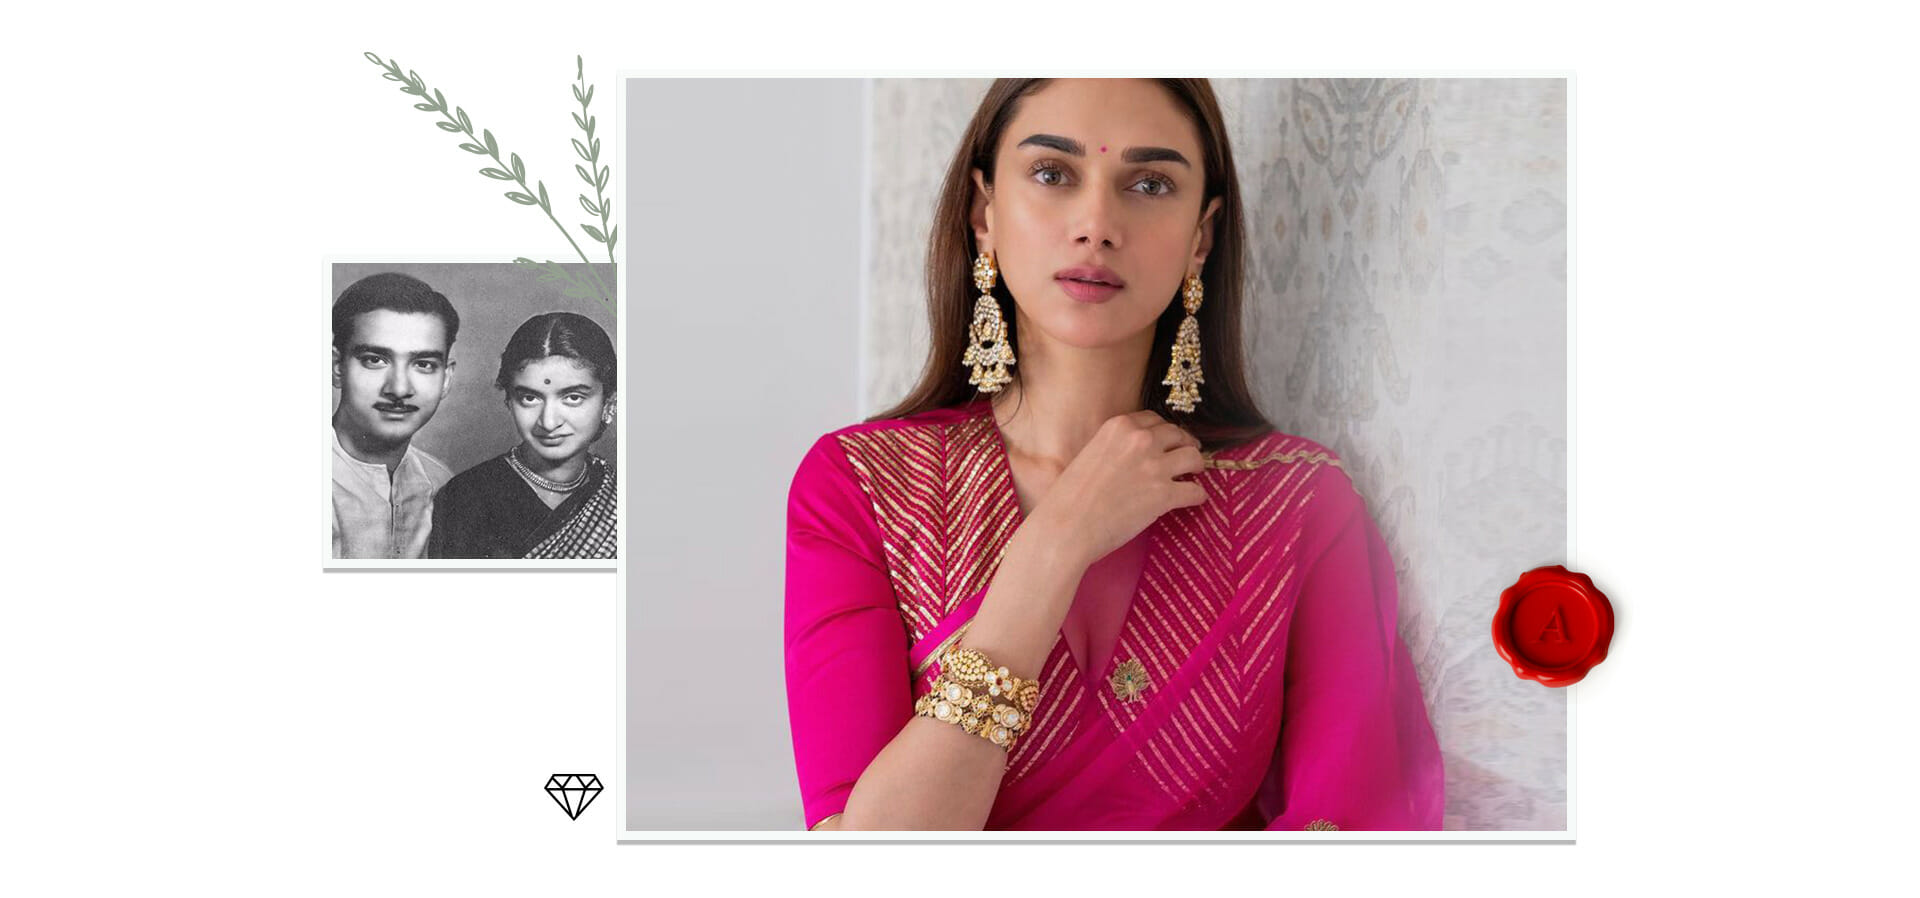 The artist’s personal image collection. | Image (R): Sanam Ratansi’s Instagram account, jewellery: Madhuban by Manubhai. 